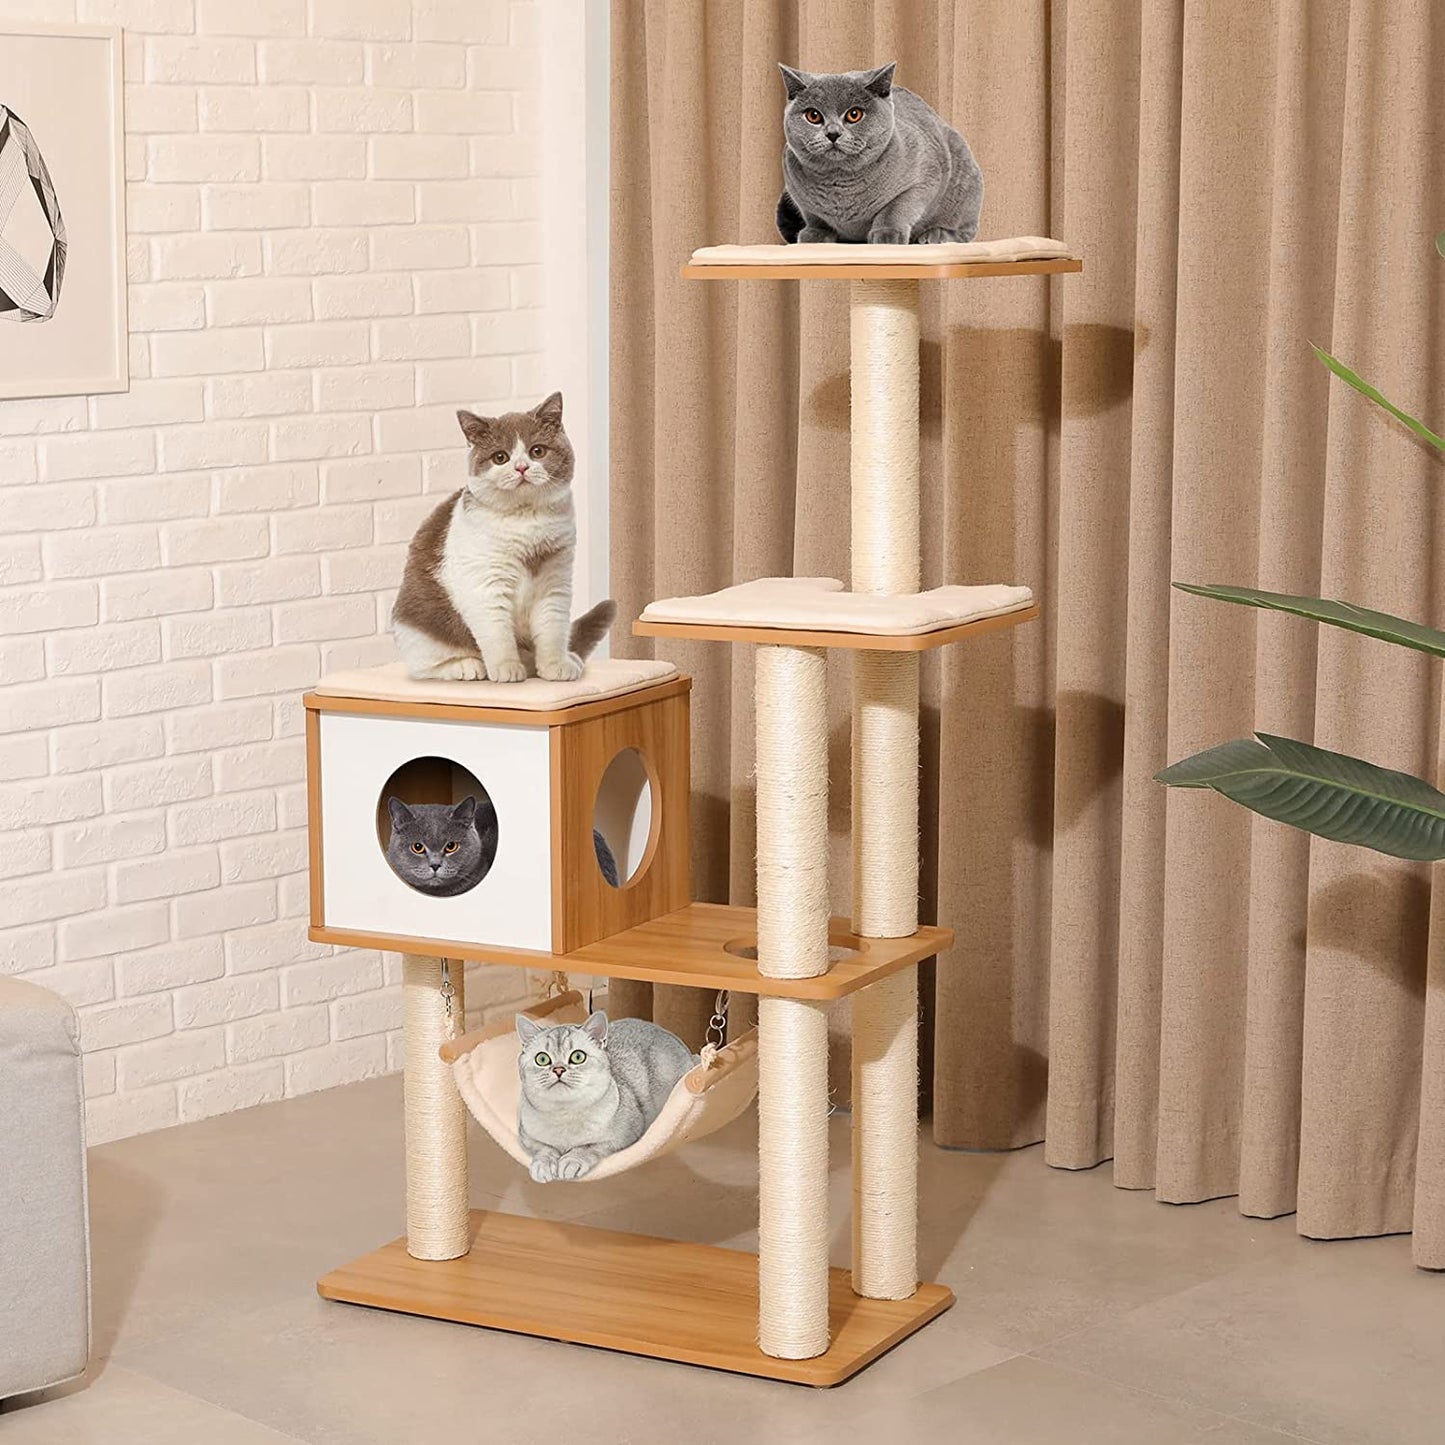 LUDOSPORT 45" Multi-Level Cat Tree Condo Wooden Cat Tower Kitten Climbing Tree with Removable Mat, Scratch Post